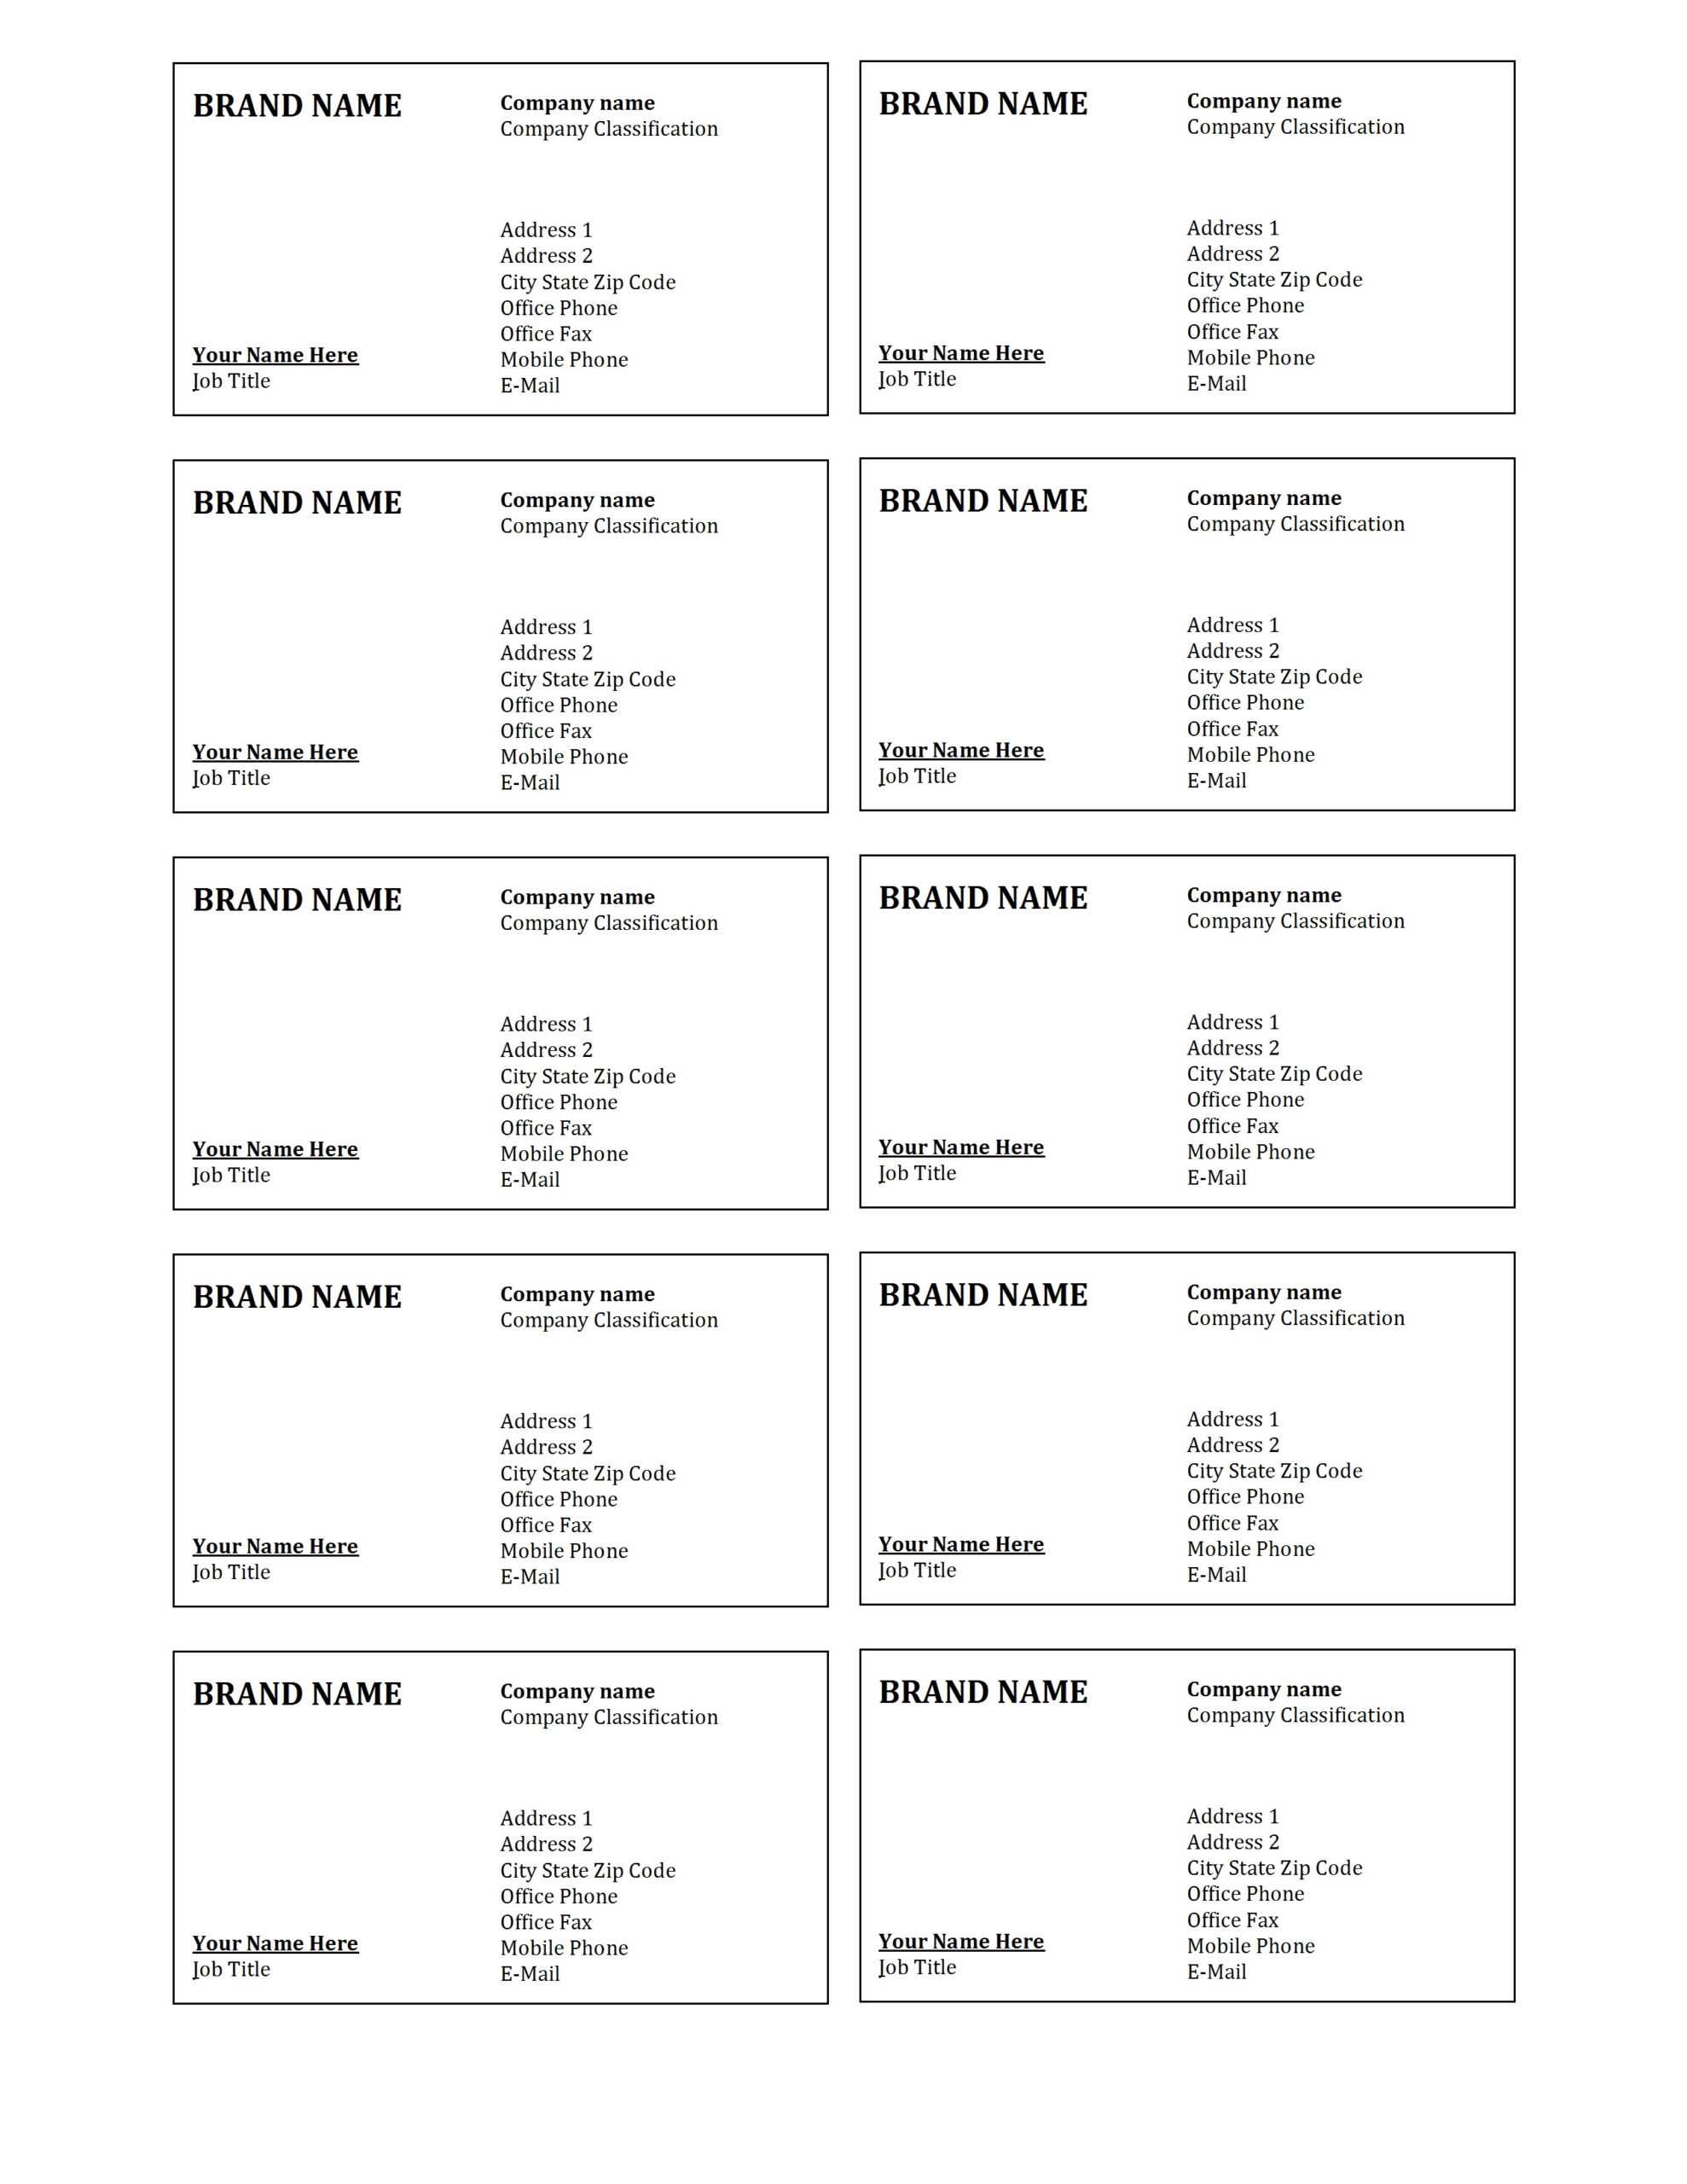 9 Visiting Card Sheet Templates | Fax Cover Sheet Examples Intended For Plain Business Card Template Microsoft Word